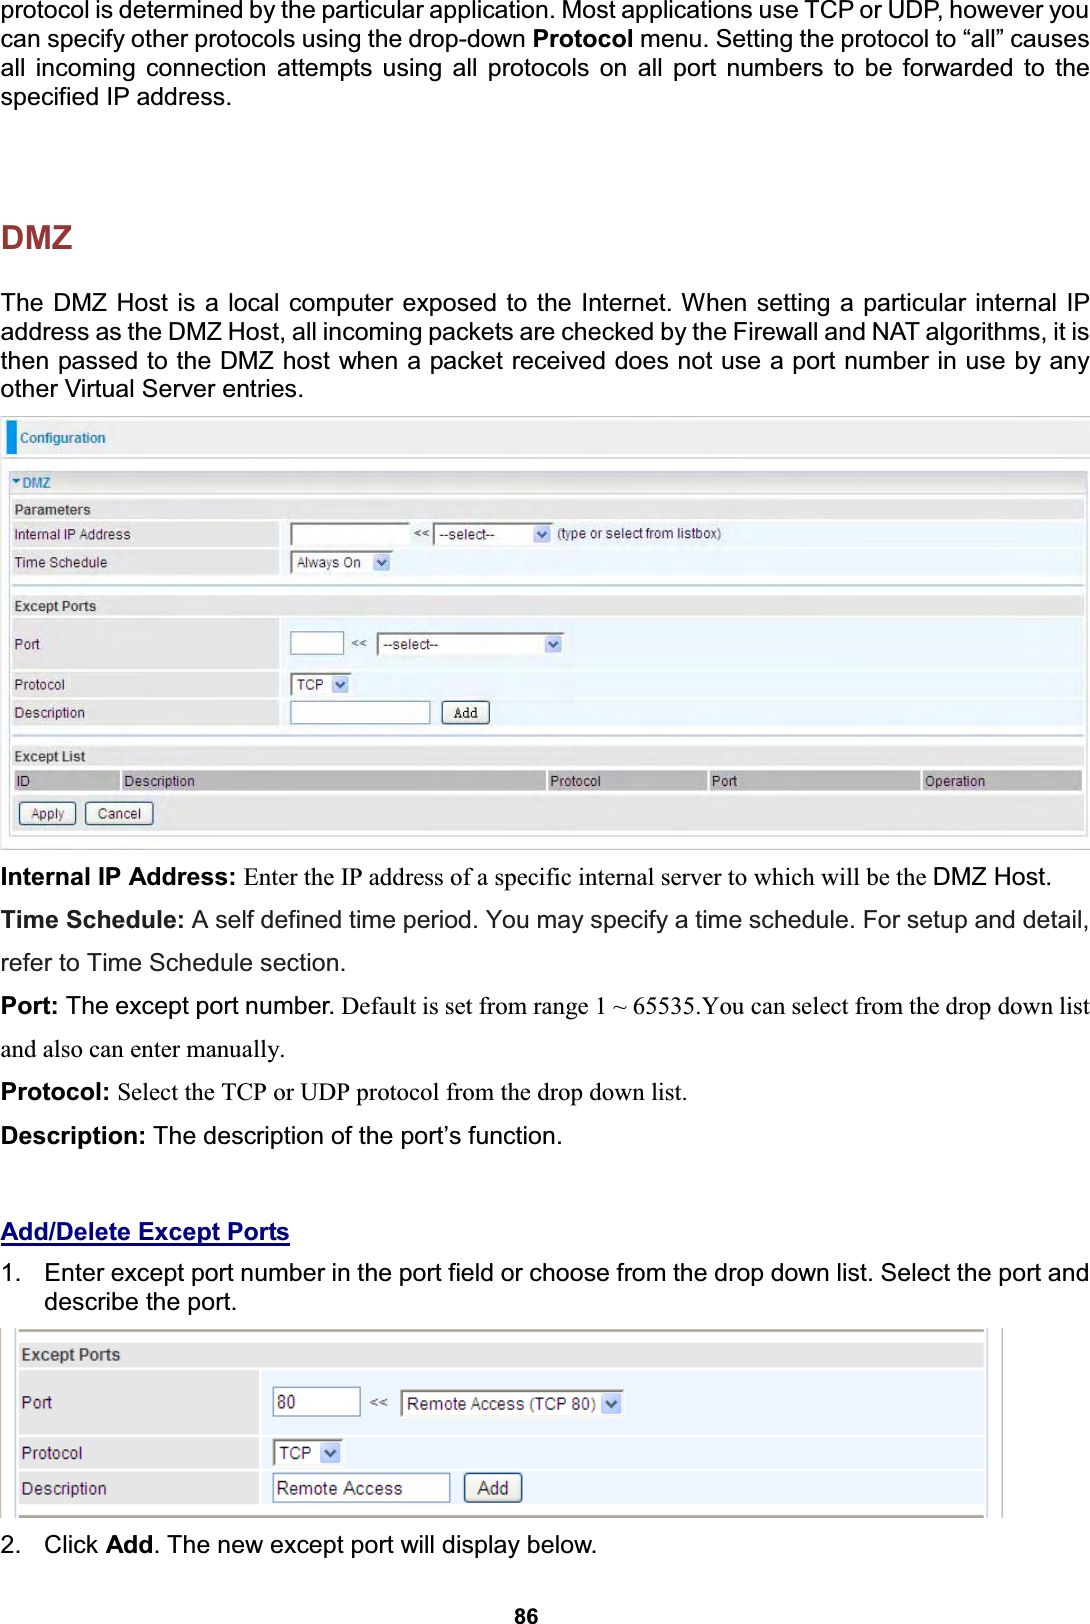  86 protocol is determined by the particular application. Most applications use TCP or UDP, however you can specify other protocols using the drop-down Protocol menu. Setting the protocol to “all” causes all incoming connection attempts using all protocols on all port numbers to be forwarded to the specified IP address.  DMZ The DMZ Host is a local computer exposed to the Internet. When setting a particular internal IP address as the DMZ Host, all incoming packets are checked by the Firewall and NAT algorithms, it is then passed to the DMZ host when a packet received does not use a port number in use by any other Virtual Server entries.  Internal IP Address: Enter the IP address of a specific internal server to which will be the DMZ Host. Time Schedule: A self defined time period. You may specify a time schedule. For setup and detail, refer to Time Schedule section. Port: The except port number. Default is set from range 1 ~ 65535.You can select from the drop down list and also can enter manually. Protocol: Select the TCP or UDP protocol from the drop down list. Description: The description of the port’s function.  Add/Delete Except Ports 1.  Enter except port number in the port field or choose from the drop down list. Select the port and describe the port.   2. Click Add. The new except port will display below.   